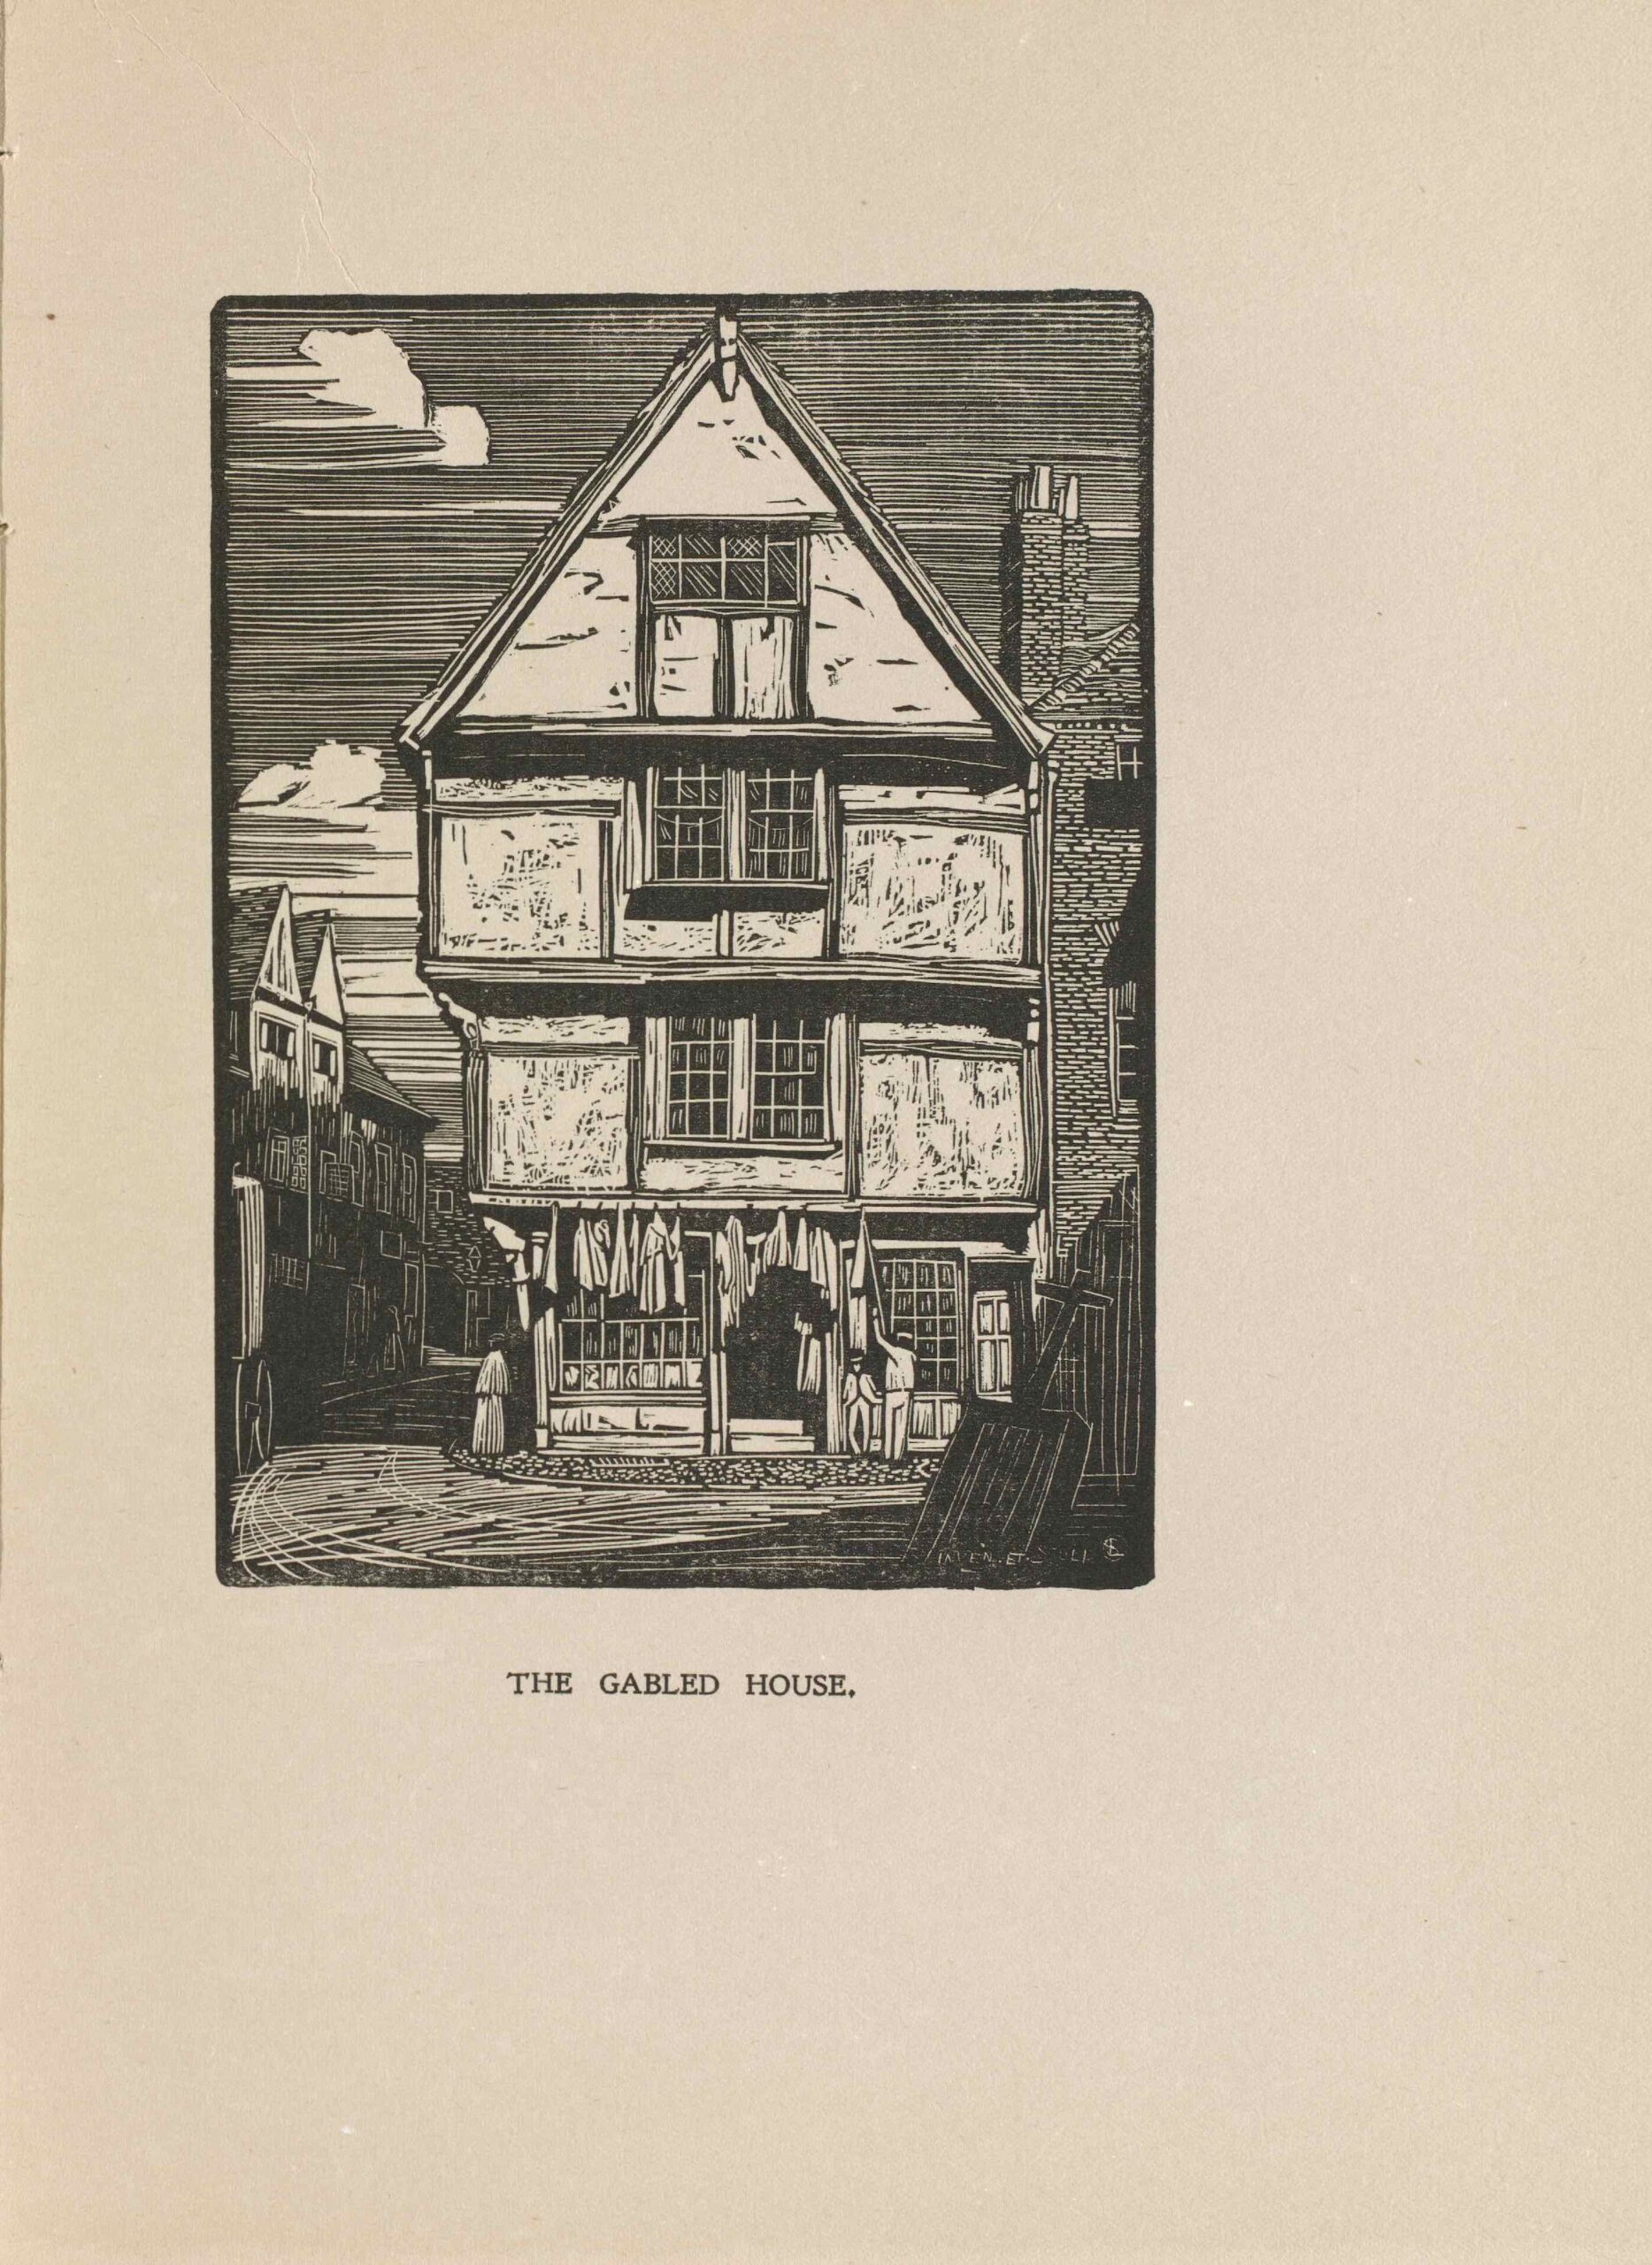 The image is in portrait orientation and is centered on the page within a rectangular border. The image printed in black ink. The front of a lightly coloured Tudor-style house is centered in the foreground of the image. The house is on the corner of a street and is four stories high. There are two-paneled windows in the middle of every story except for the first floor. Each storey slightly increases in length from the bottom to the top, protruding on the left. The house is attached to a bricked building on the right. The brick building is only partially depicted. There are three small figures depicted in the image. Two men are positioned to the right of the house’s front door. One is leaning on the door frame facing forward, and the other is facing towards the front of the house. A woman is standing at the corner of the street, to the left of the house. In the bottom left foreground, a carriage is entering the image. A shovel is positioned close to the front of the image’s bottom right. In the background left, more houses line the street but are darkened by the shadow of the house in the foreground.